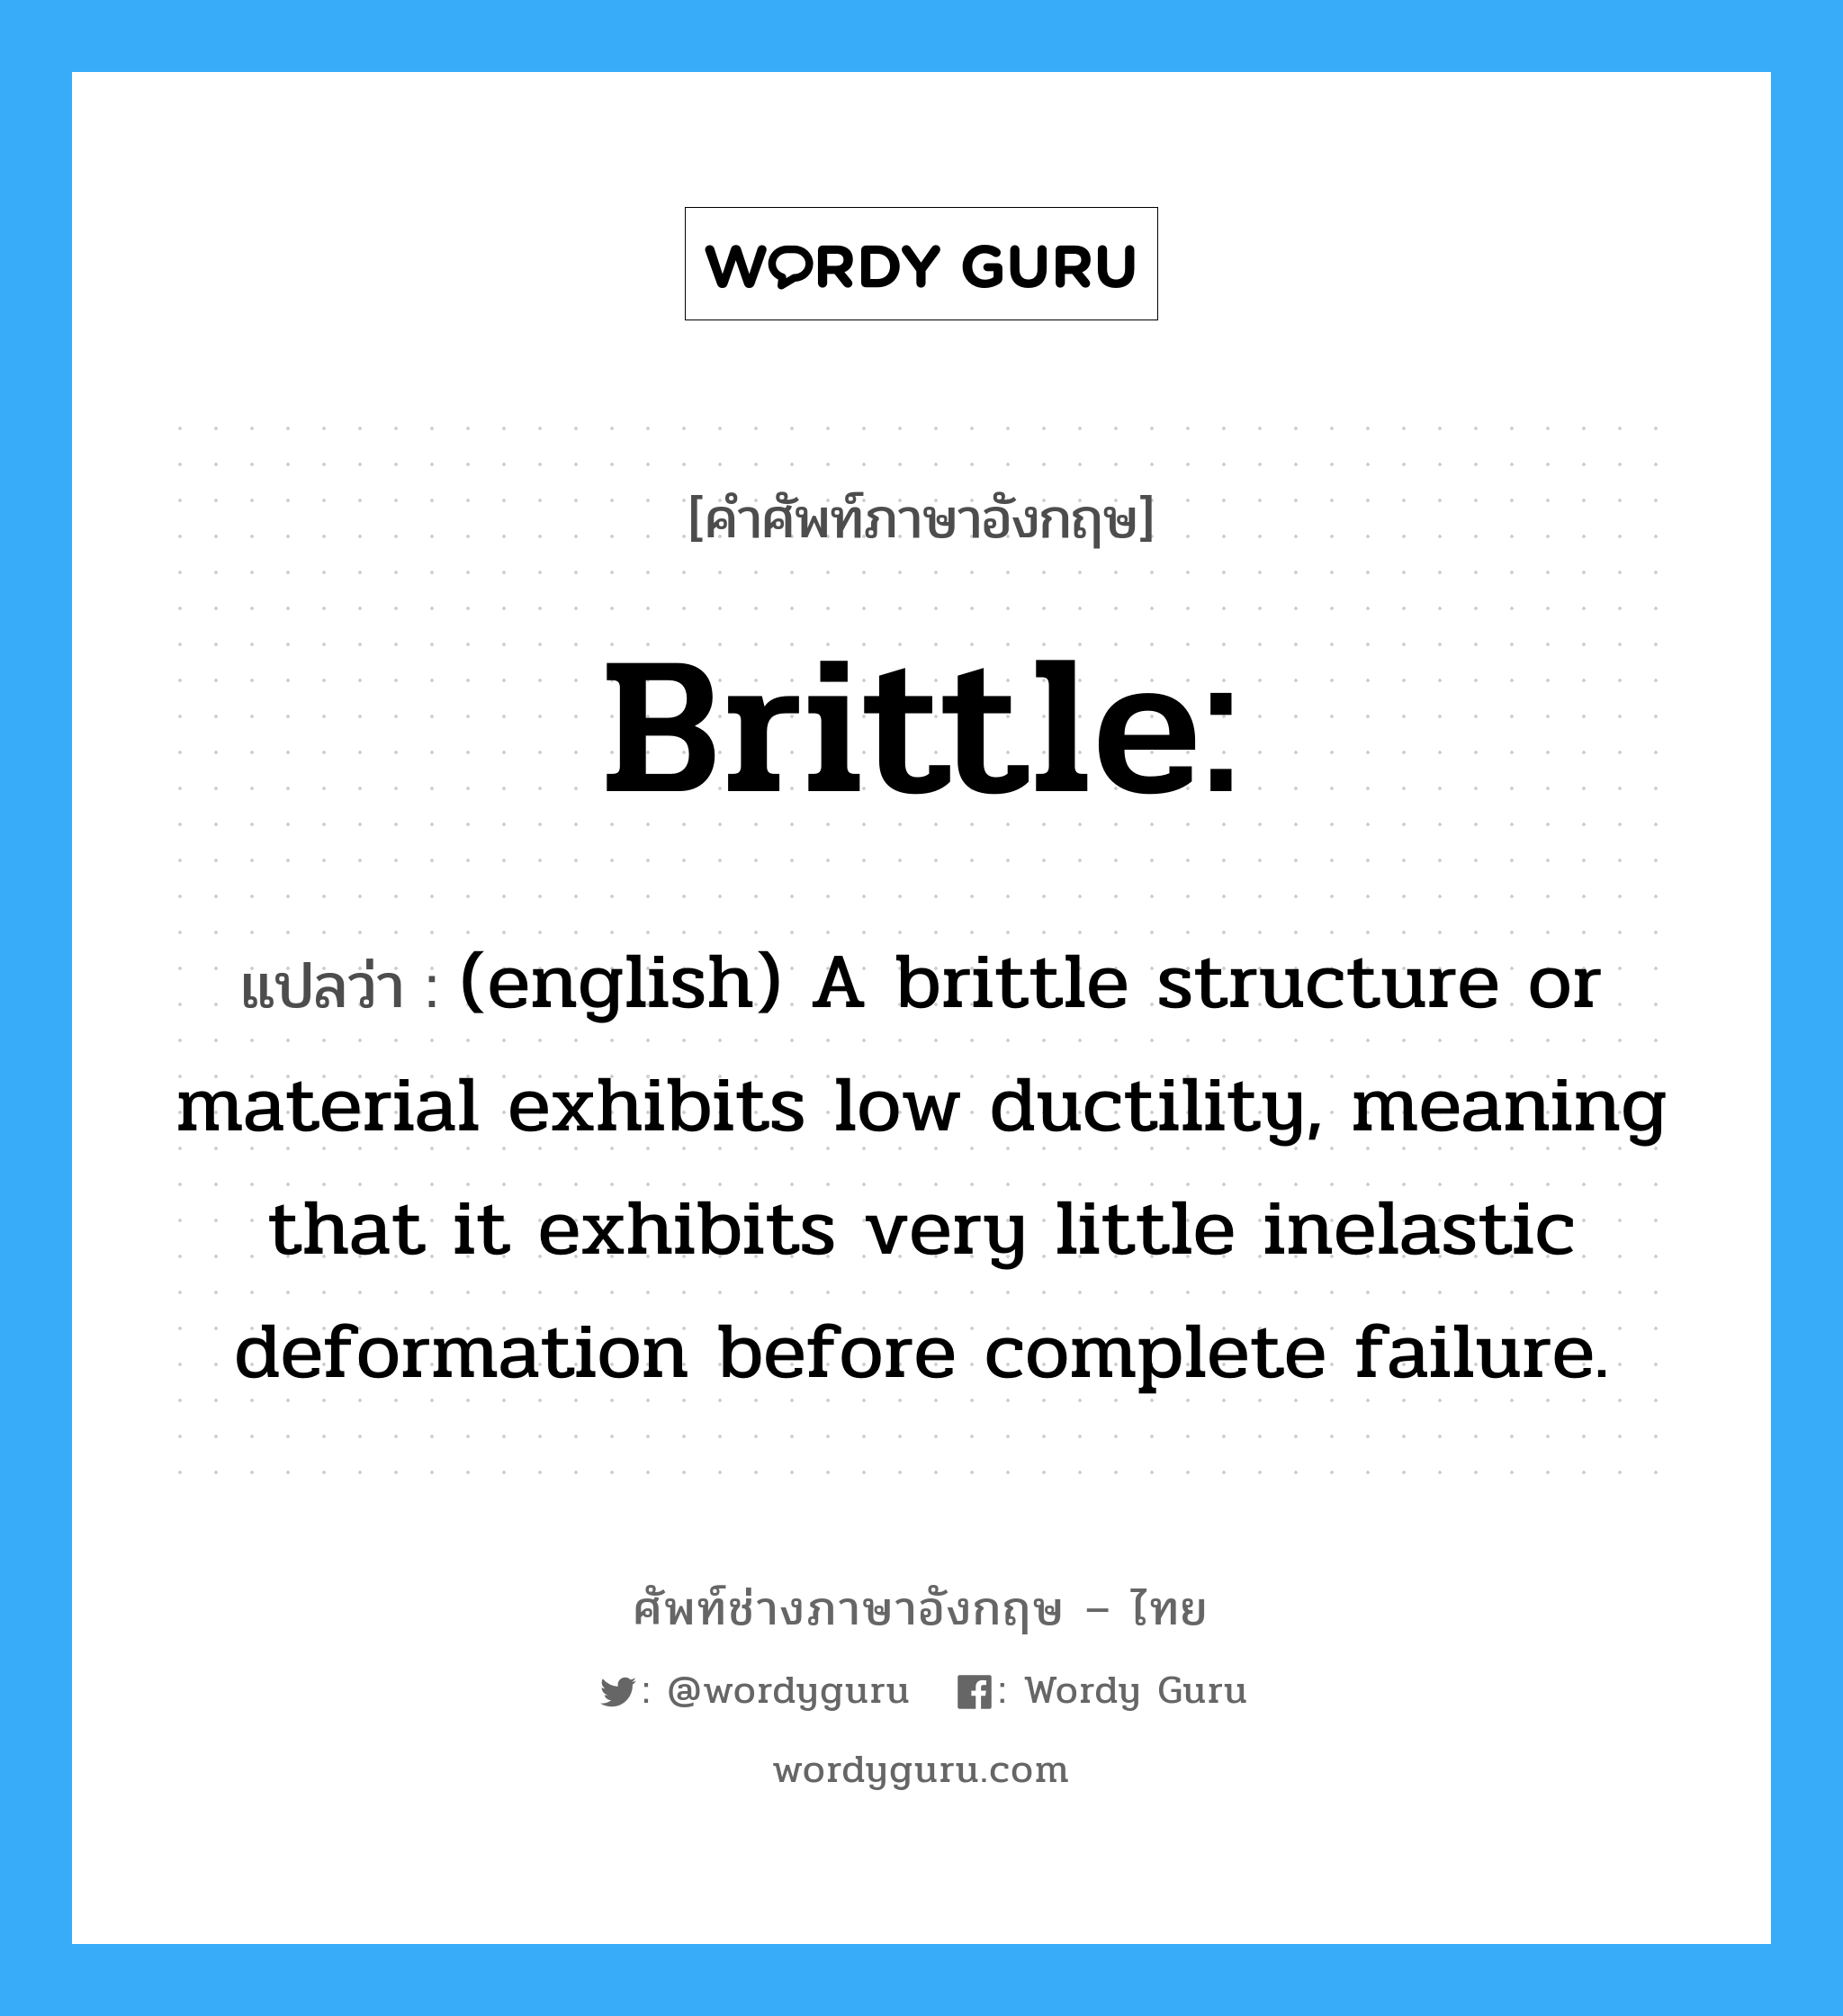 (english) A brittle structure or material exhibits low ductility, meaning that it exhibits very little inelastic deformation before complete failure. ภาษาอังกฤษ?, คำศัพท์ช่างภาษาอังกฤษ - ไทย (english) A brittle structure or material exhibits low ductility, meaning that it exhibits very little inelastic deformation before complete failure. คำศัพท์ภาษาอังกฤษ (english) A brittle structure or material exhibits low ductility, meaning that it exhibits very little inelastic deformation before complete failure. แปลว่า Brittle: